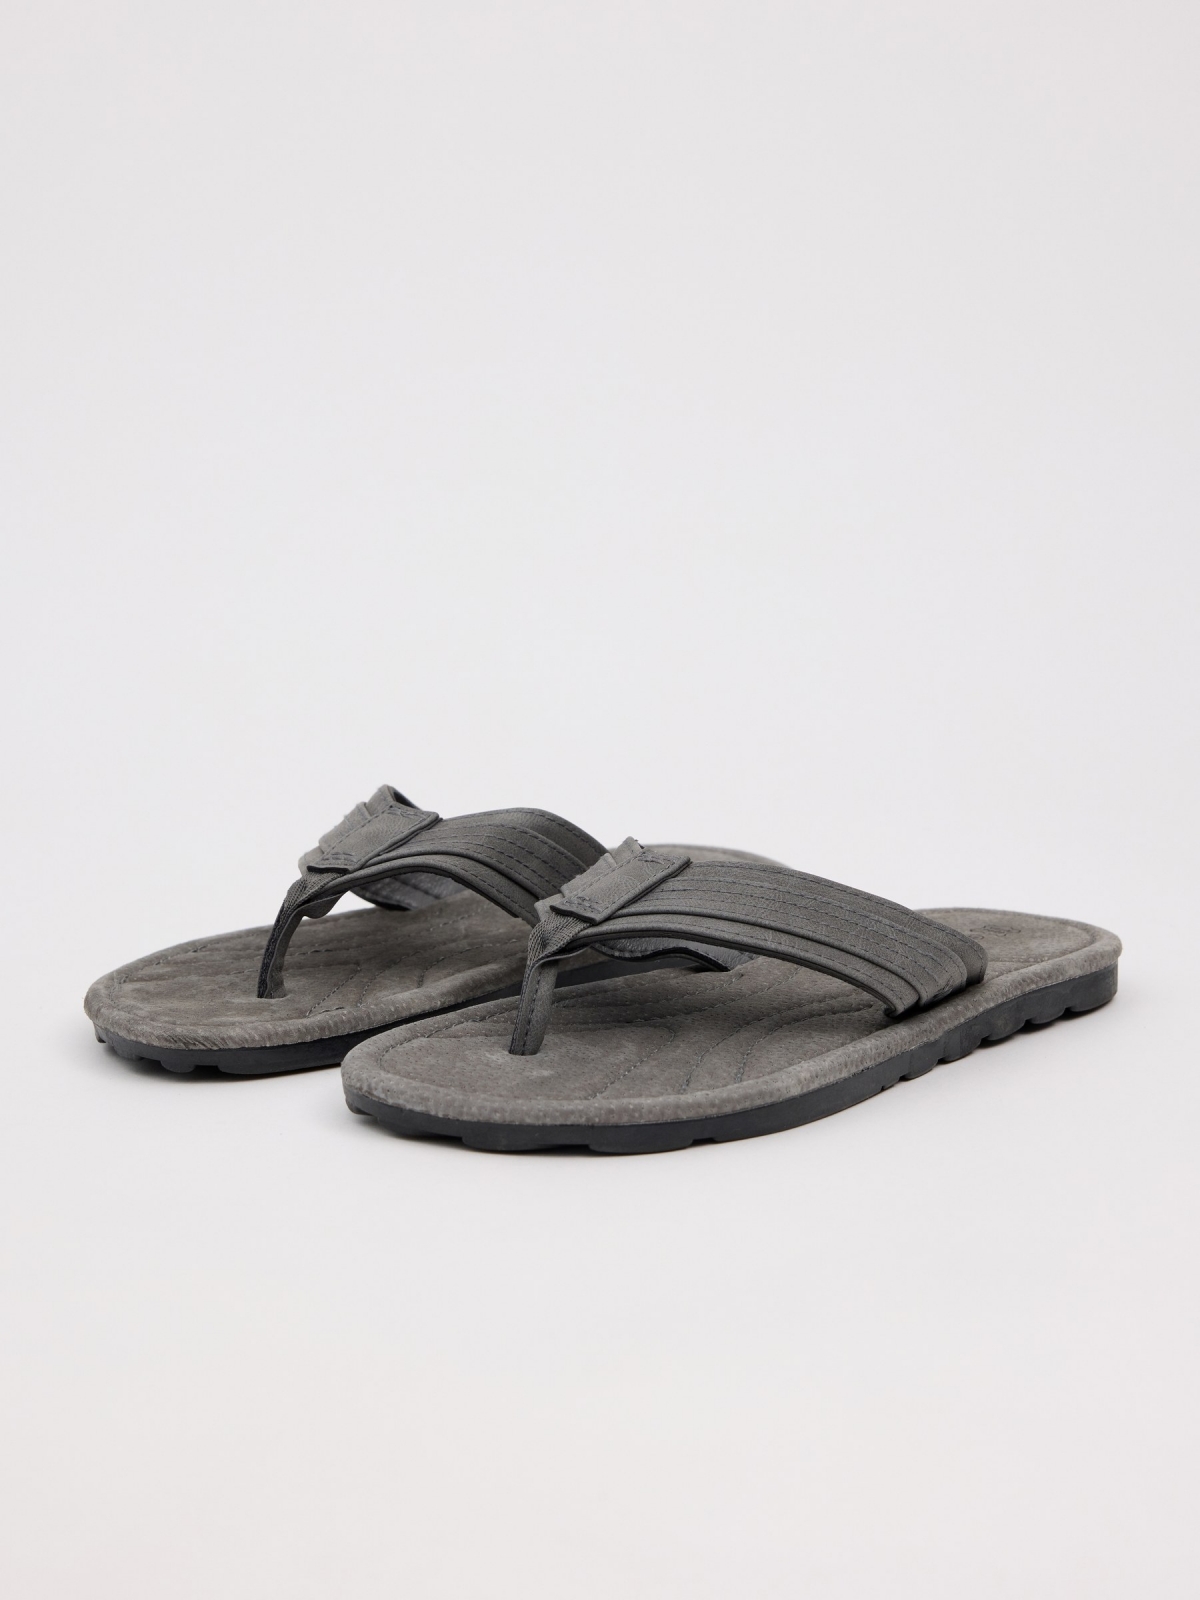 Leather toe sandal grey 45º front view